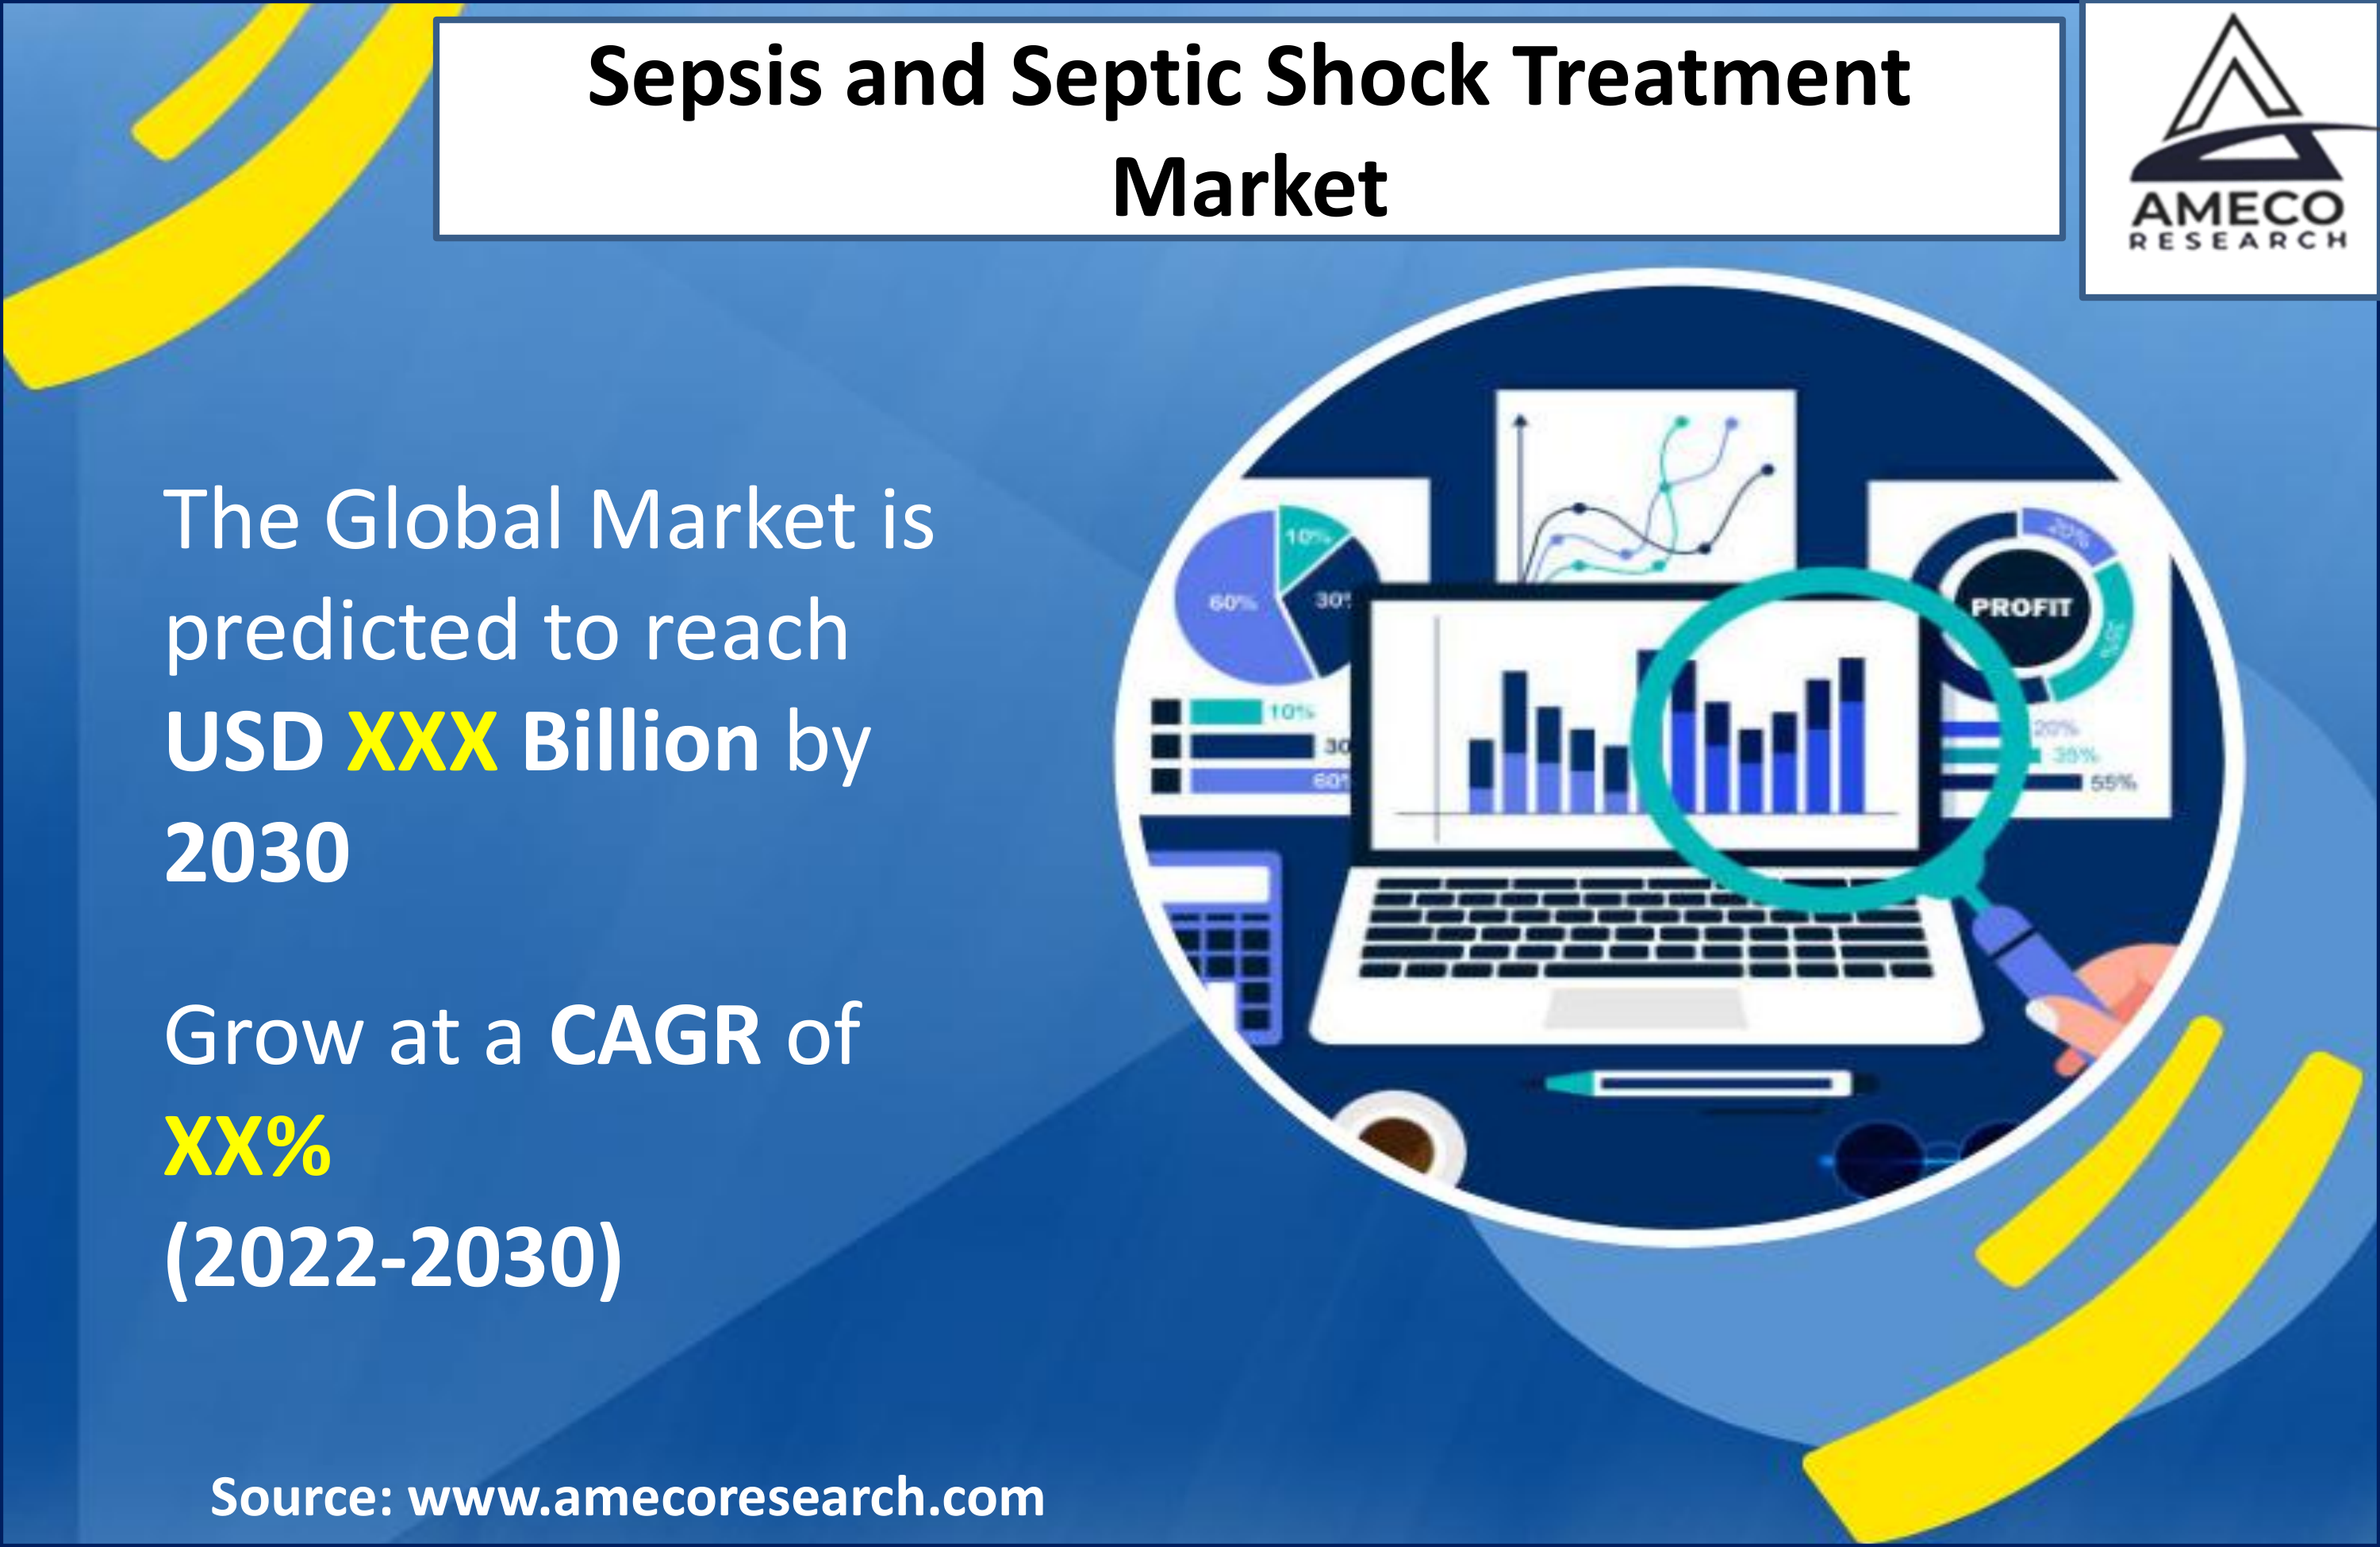 Sepsis and Septic Shock Treatment Market